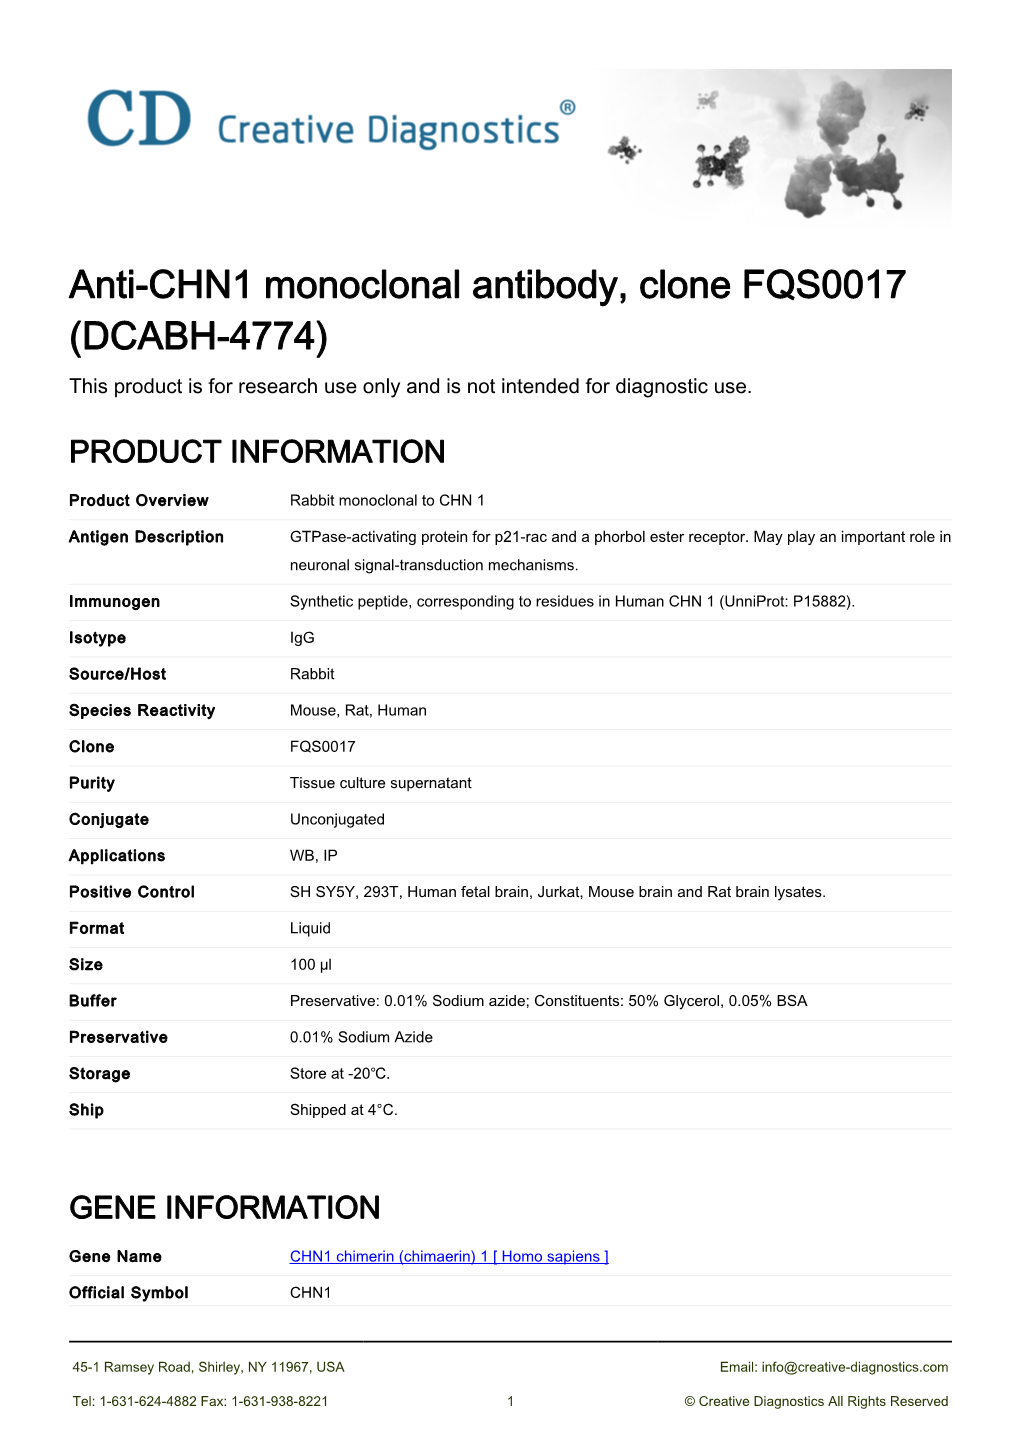 Anti-CHN1 Monoclonal Antibody, Clone FQS0017 (DCABH-4774) This Product Is for Research Use Only and Is Not Intended for Diagnostic Use